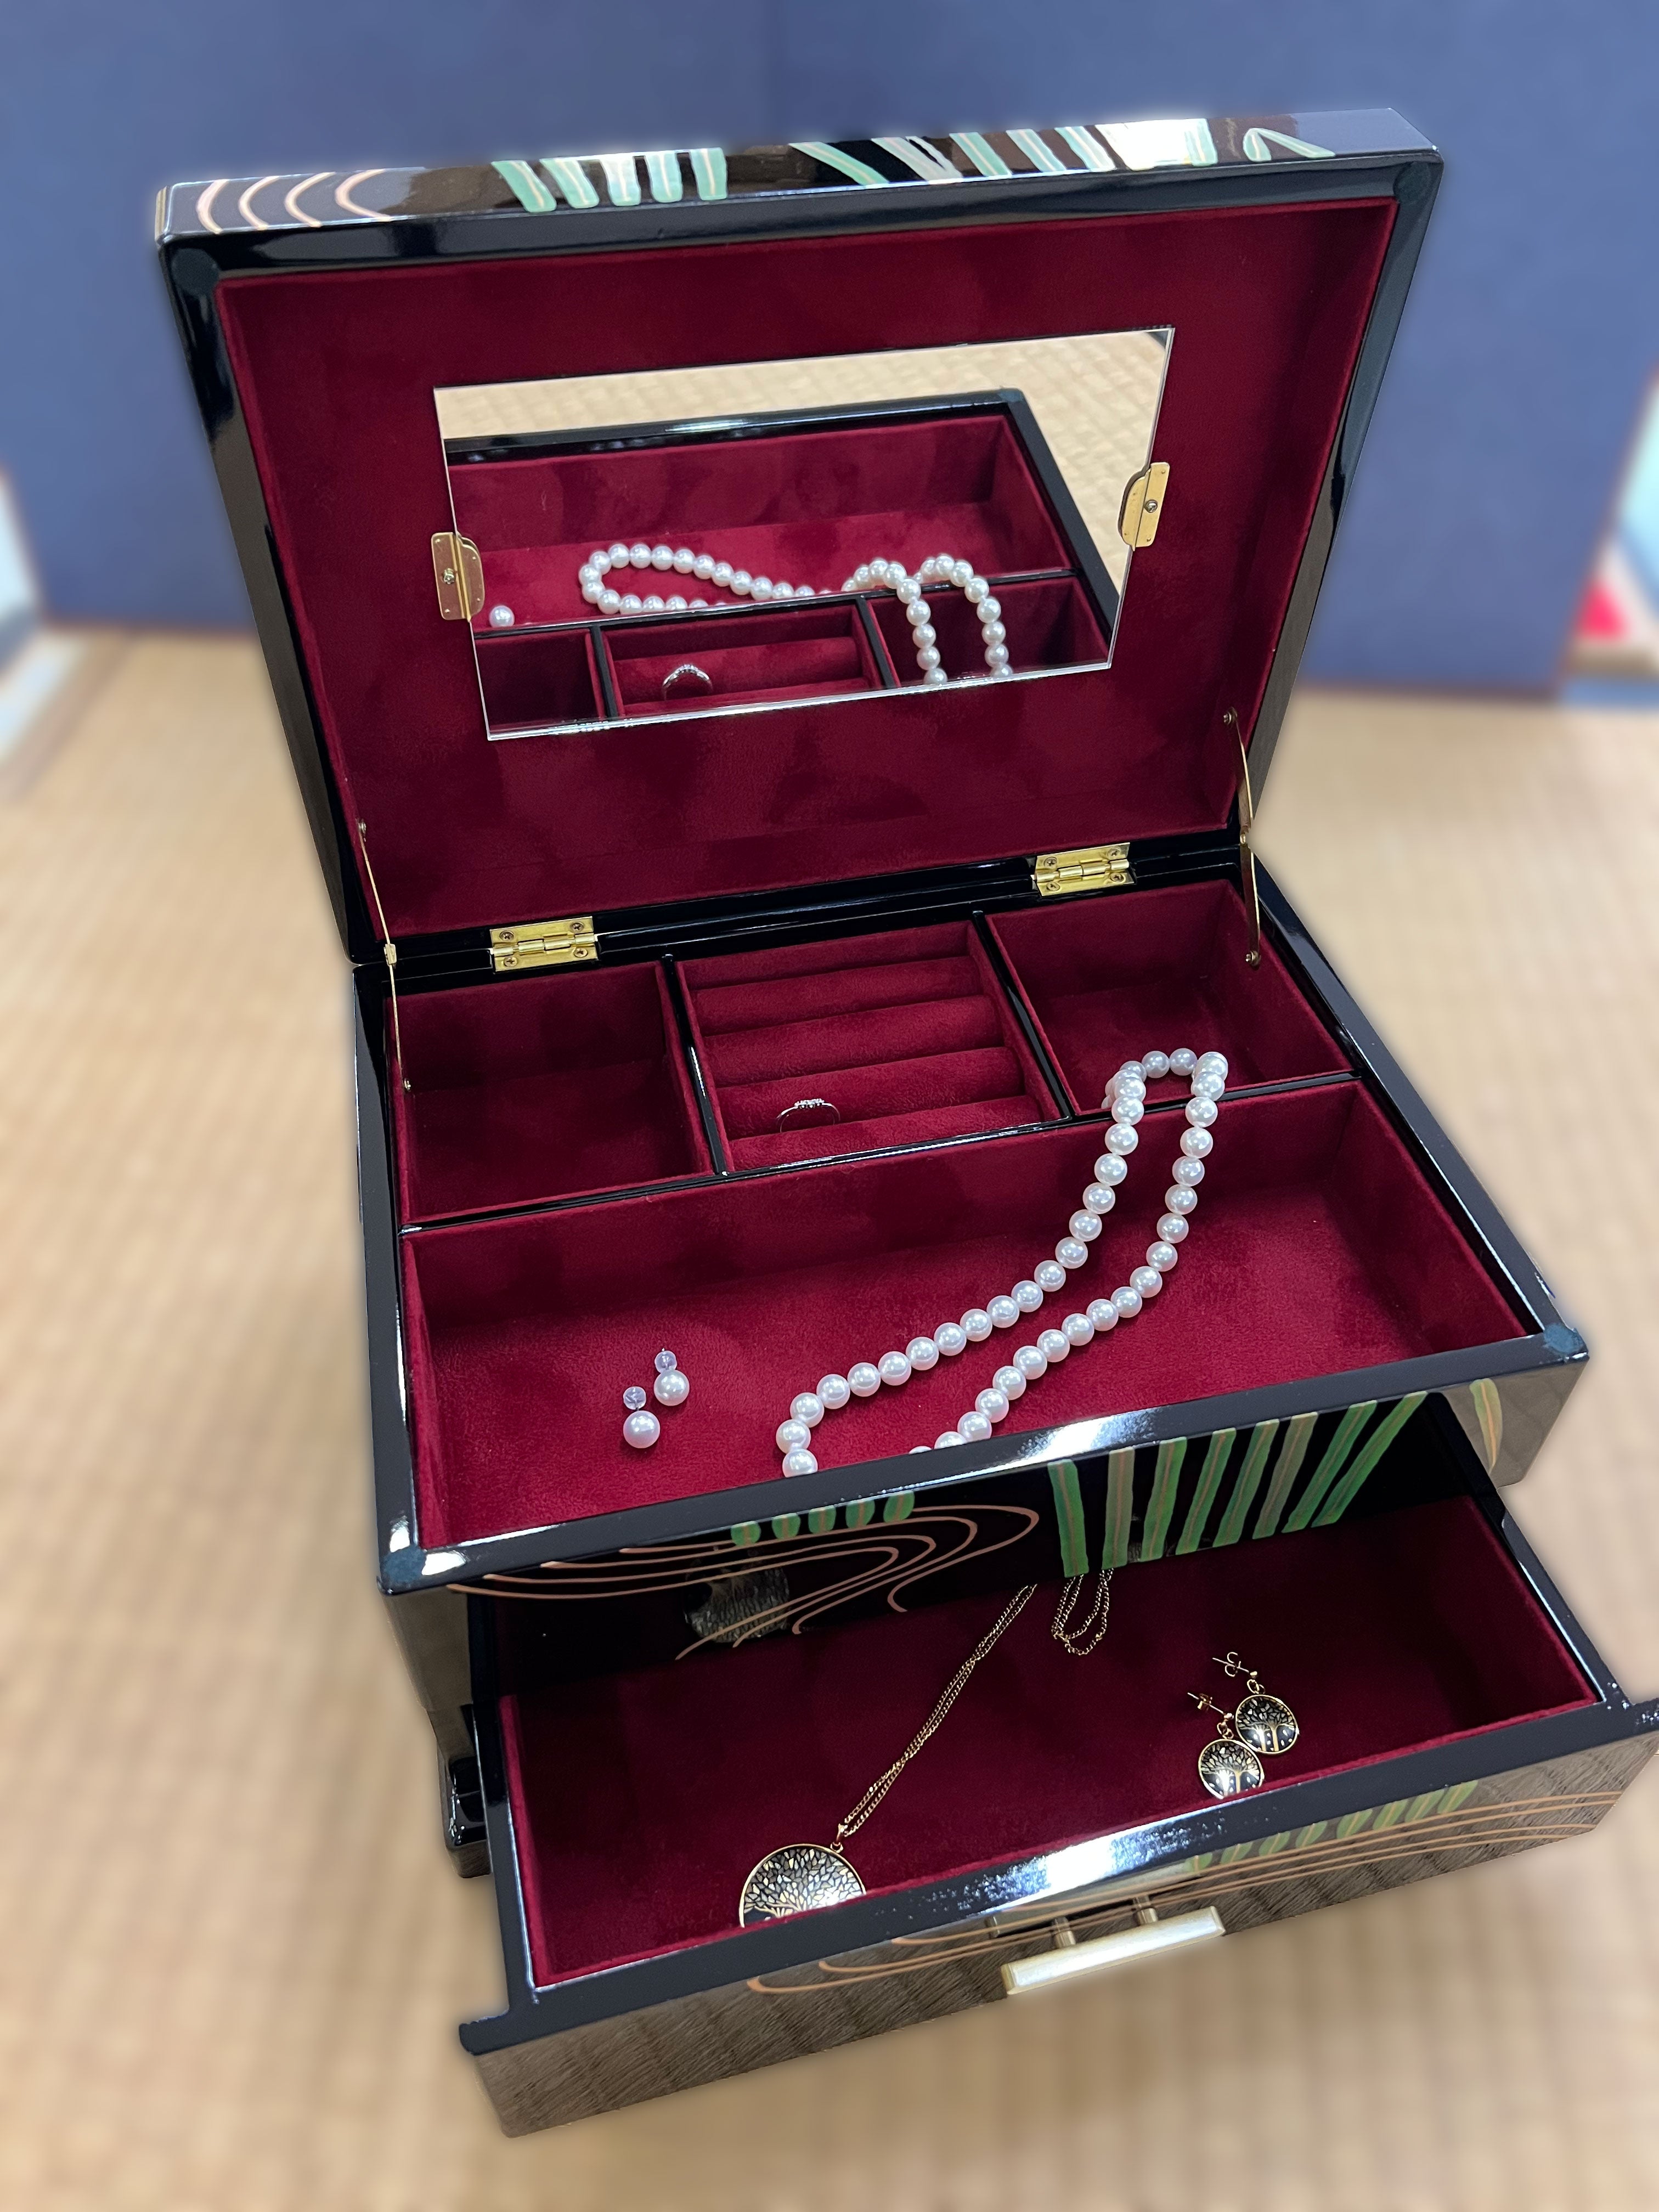 Are you looking for a Jewelry box?